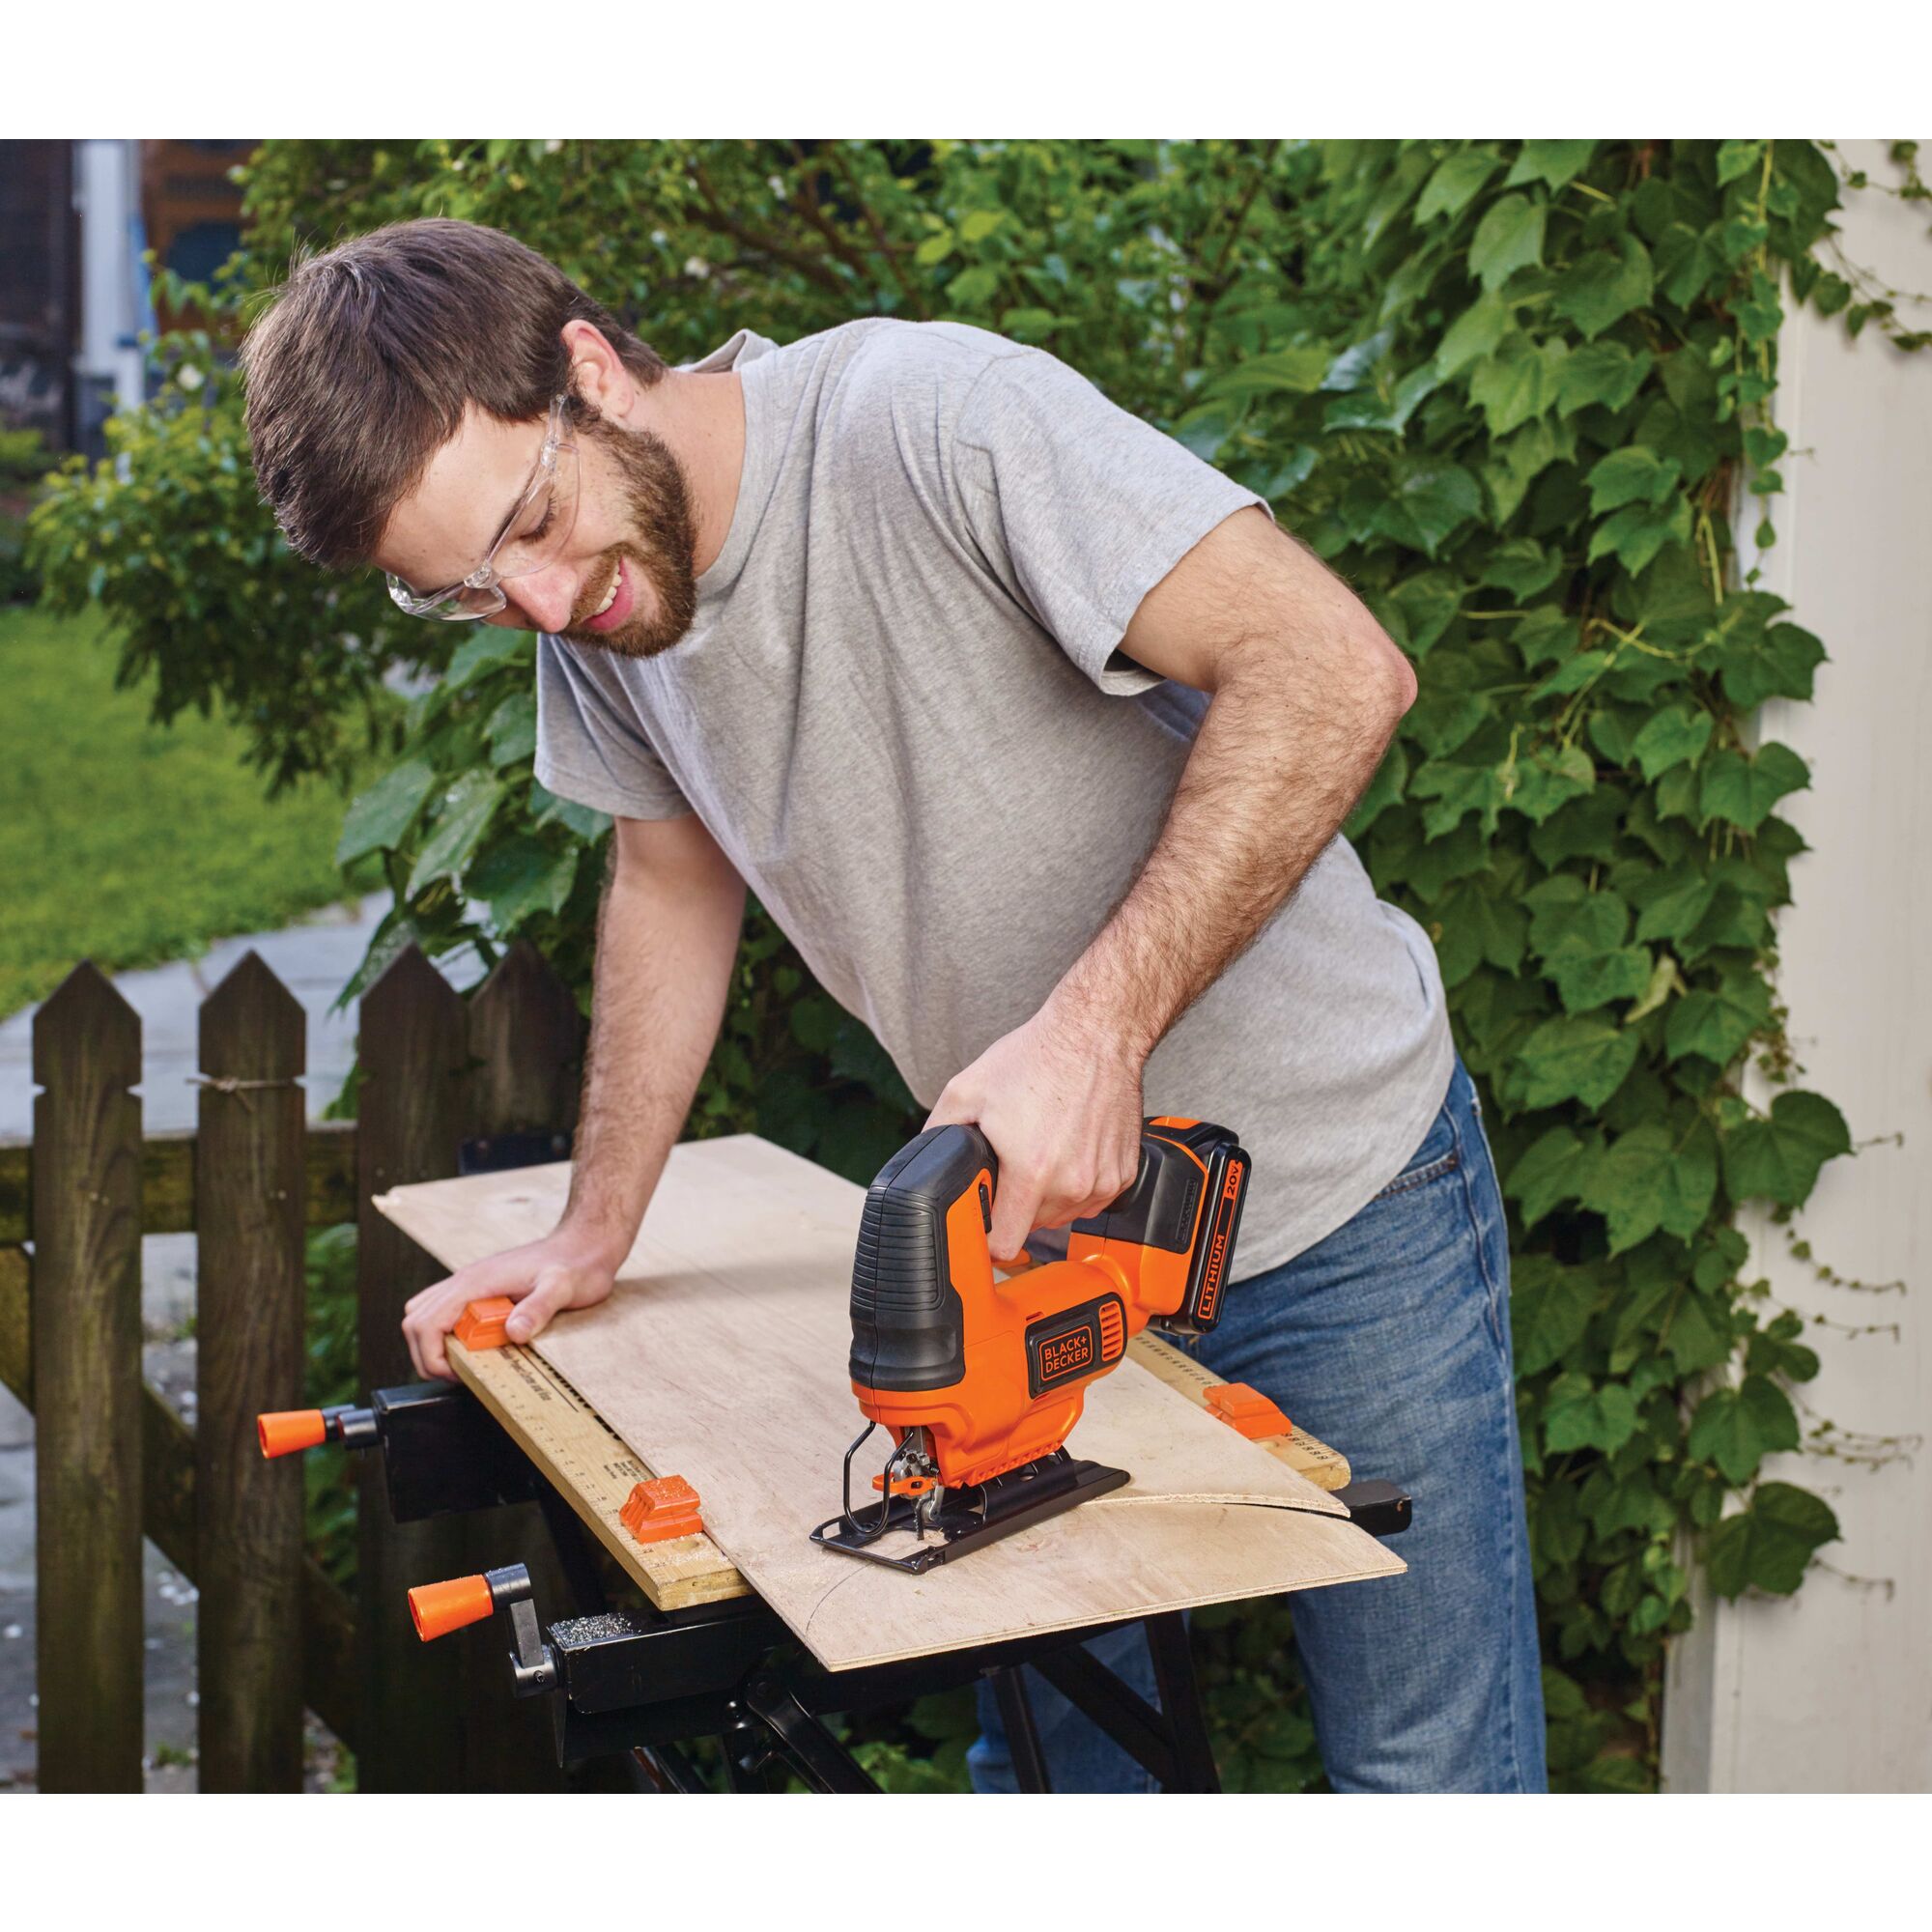 Closeup of Cordless jigsaw being used by a person for cutting wooden surface.